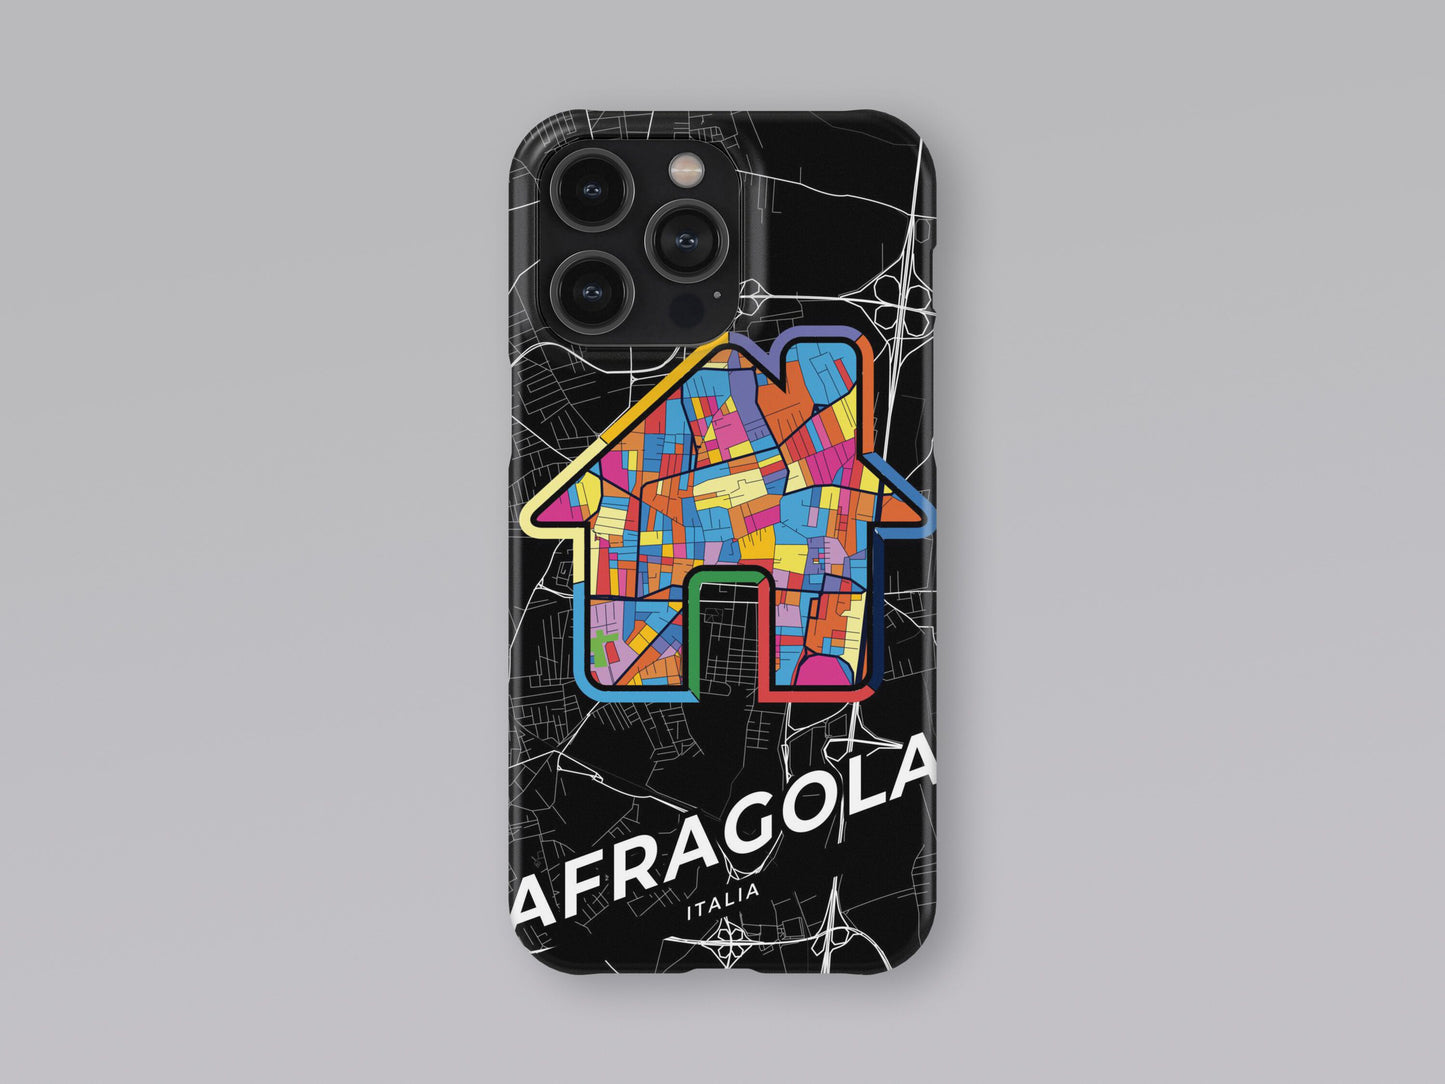 Afragola Italy slim phone case with colorful icon. Birthday, wedding or housewarming gift. Couple match cases. 3